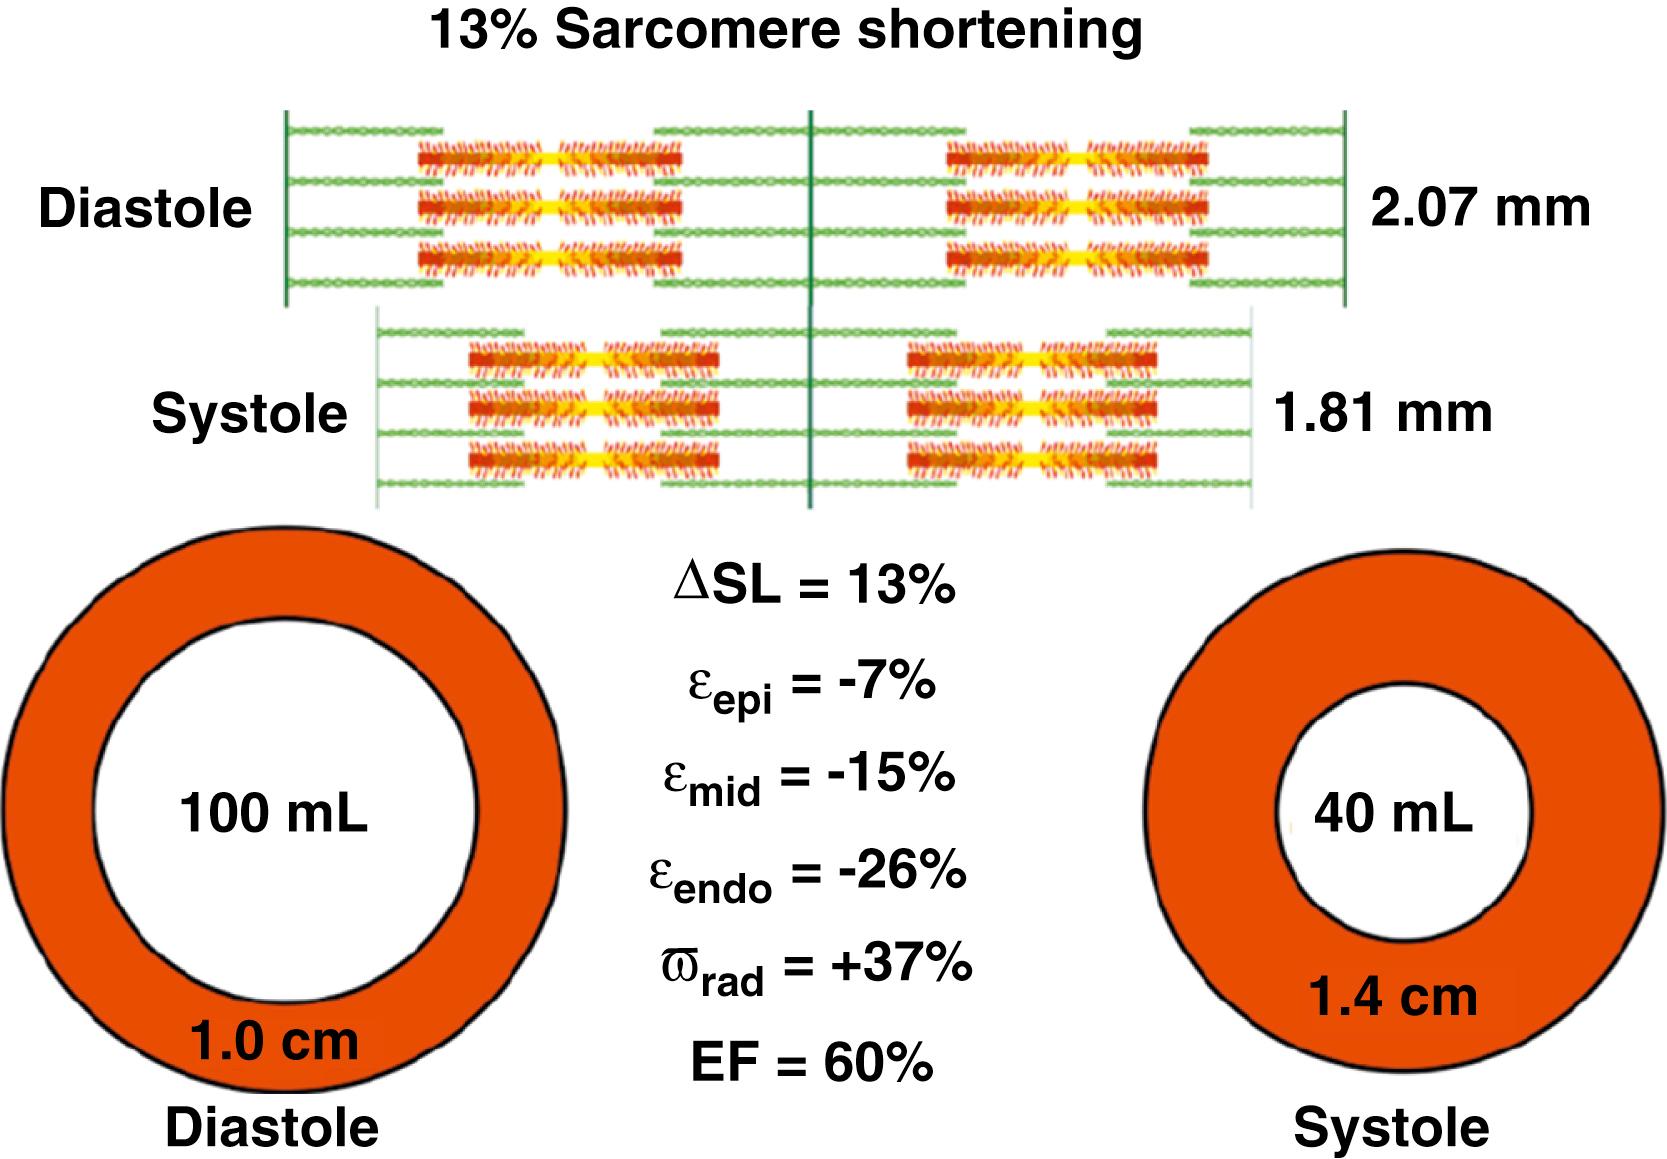 Figure 23.1, Schematic representation of sarcomere shortening (optimally near 13%) and the circumferential and radial deformation necessary to ejection 60% of the cavity volume. A simple circumferential wrapping of fibers would lead to incomplete sarcomeric shortening in the epicardium and a crumpling of myofibrils in the subendocardium. ΔSL, Change in sarcomere length; ε, regional strain, with the subscripts epi, mid, and endo referring to circumferential shortening at these respective myocardial levels and rad referring to radial thickening; EF, ejection fraction.